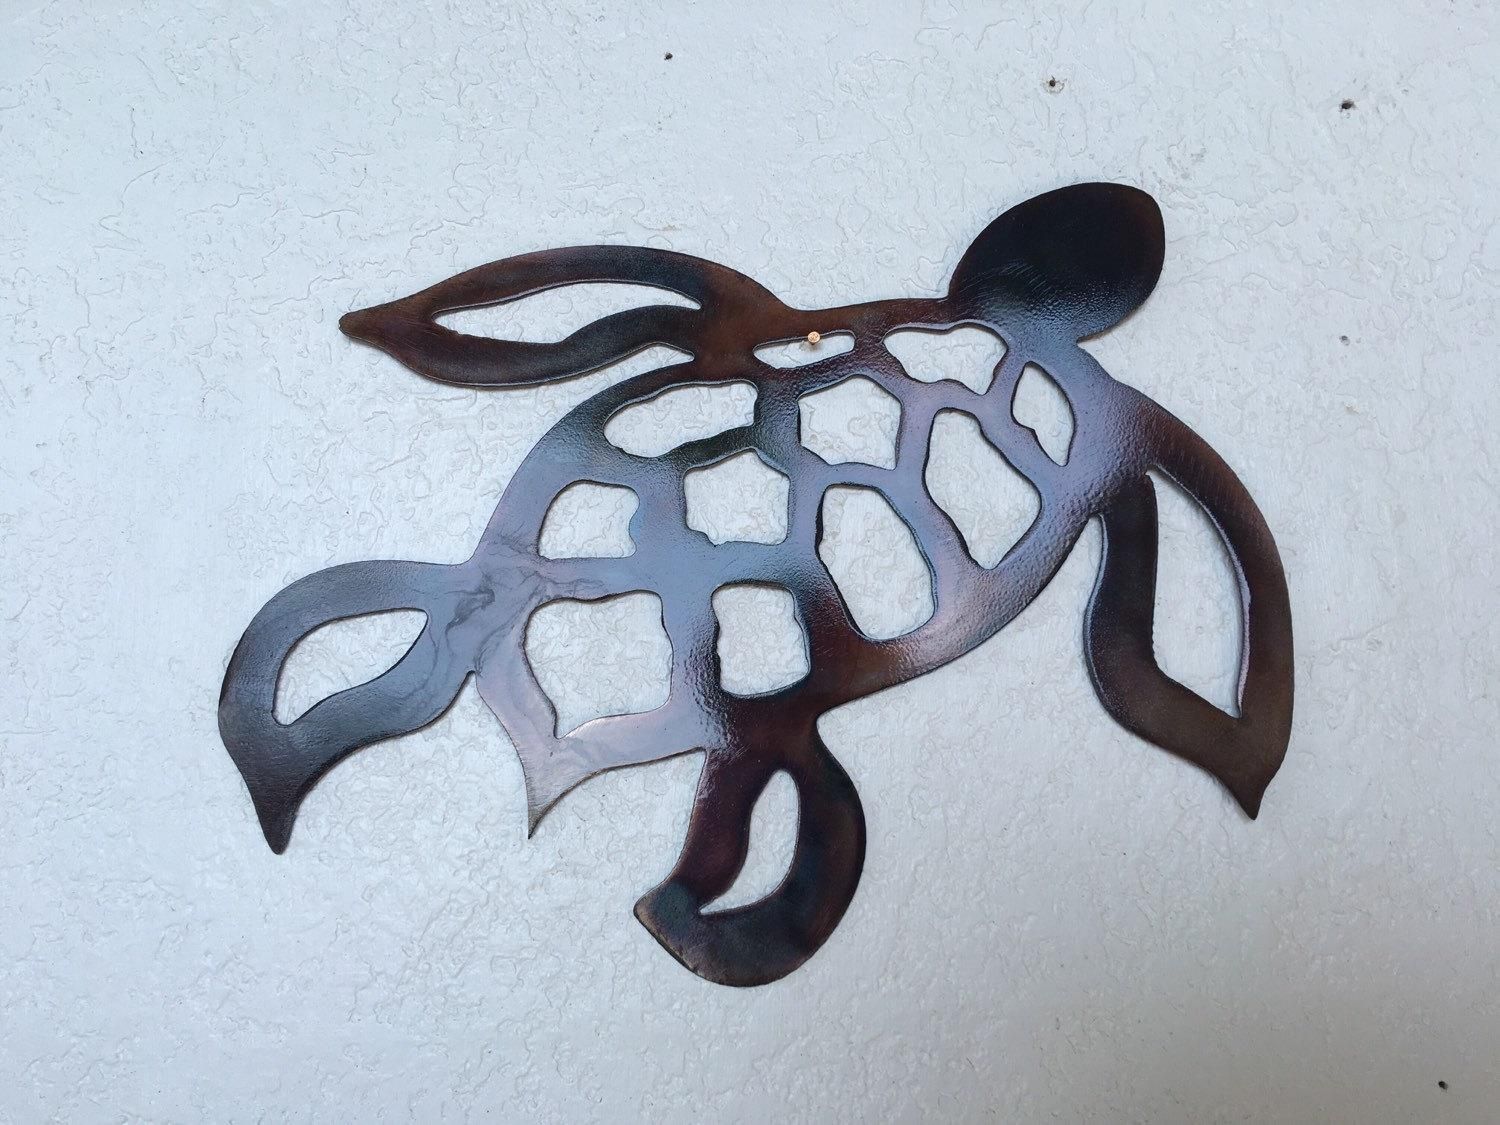 Stupendous Sea Turtle Wall Art Metal View Larger Tropical Ocean Throughout Sea Turtle Metal Wall Art (View 19 of 20)